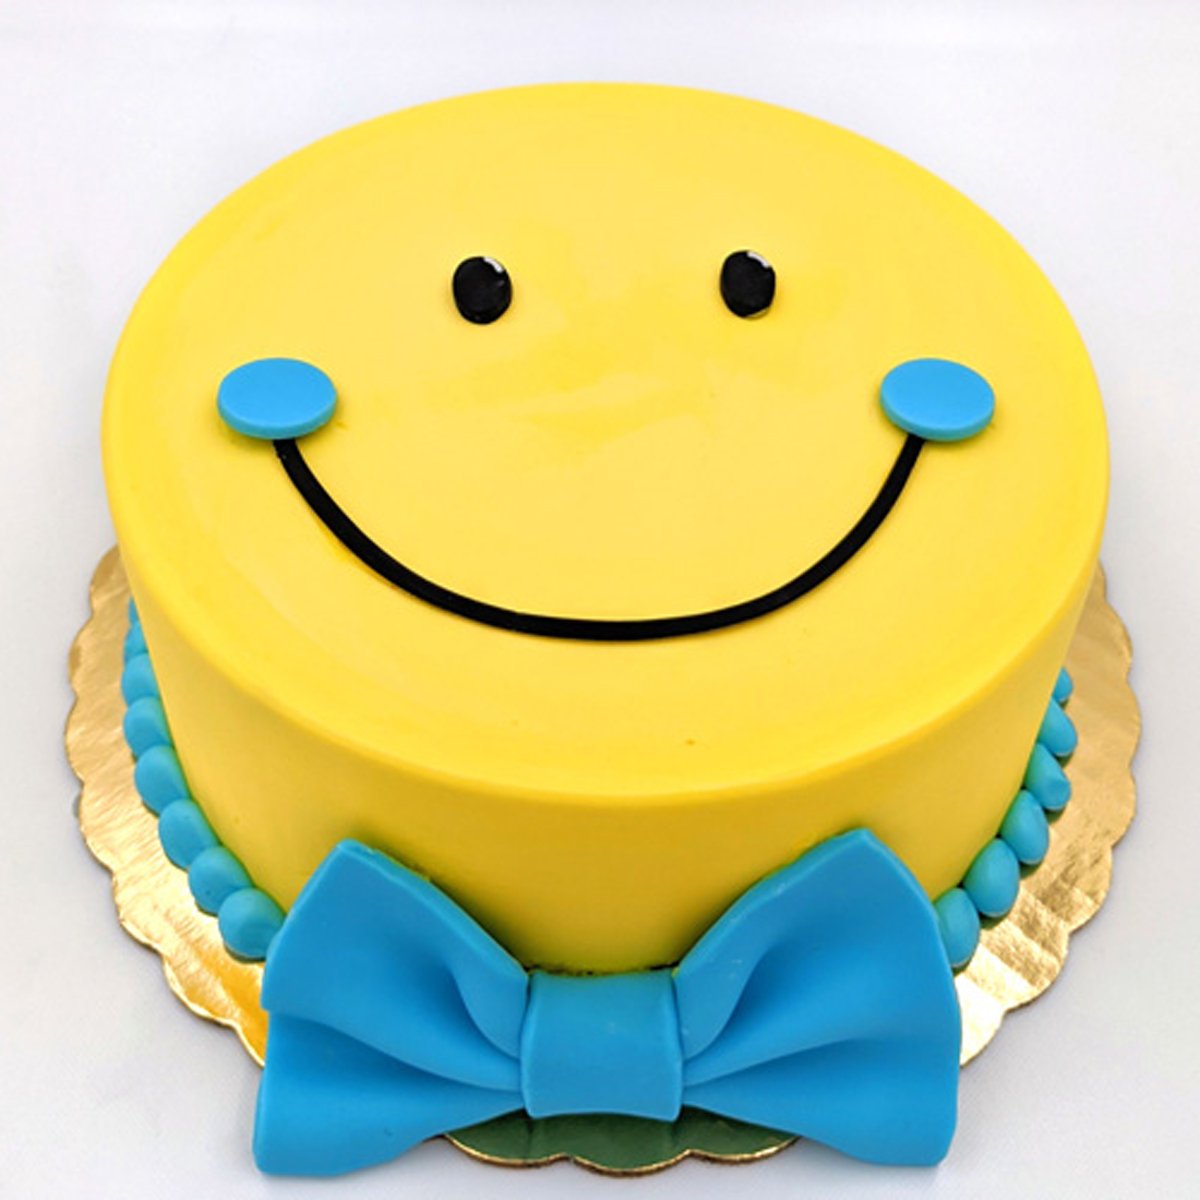 Face Cake by a Texas Cake Queen, #TBT - Oh So Savvy, the Blog.